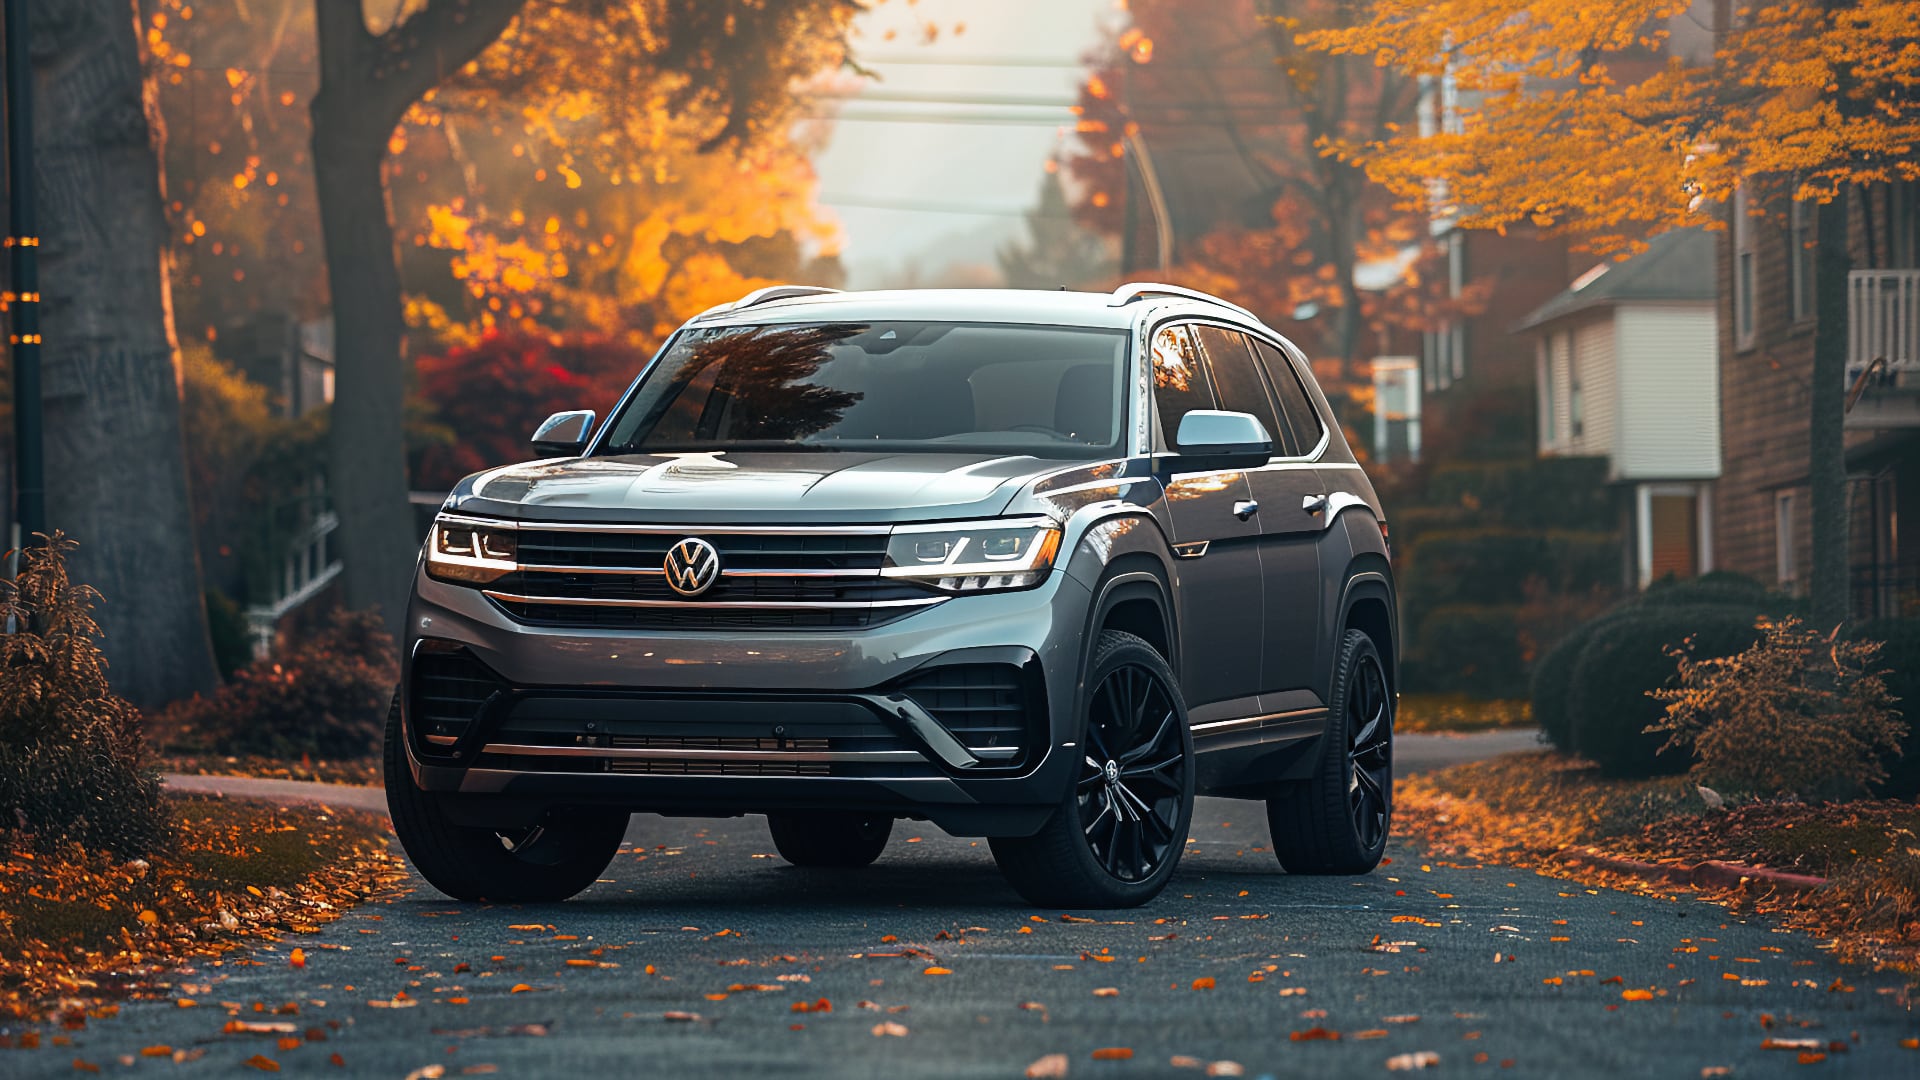 The 2020 VW Atlas, one of the years to avoid, is parked on a street in autumn.